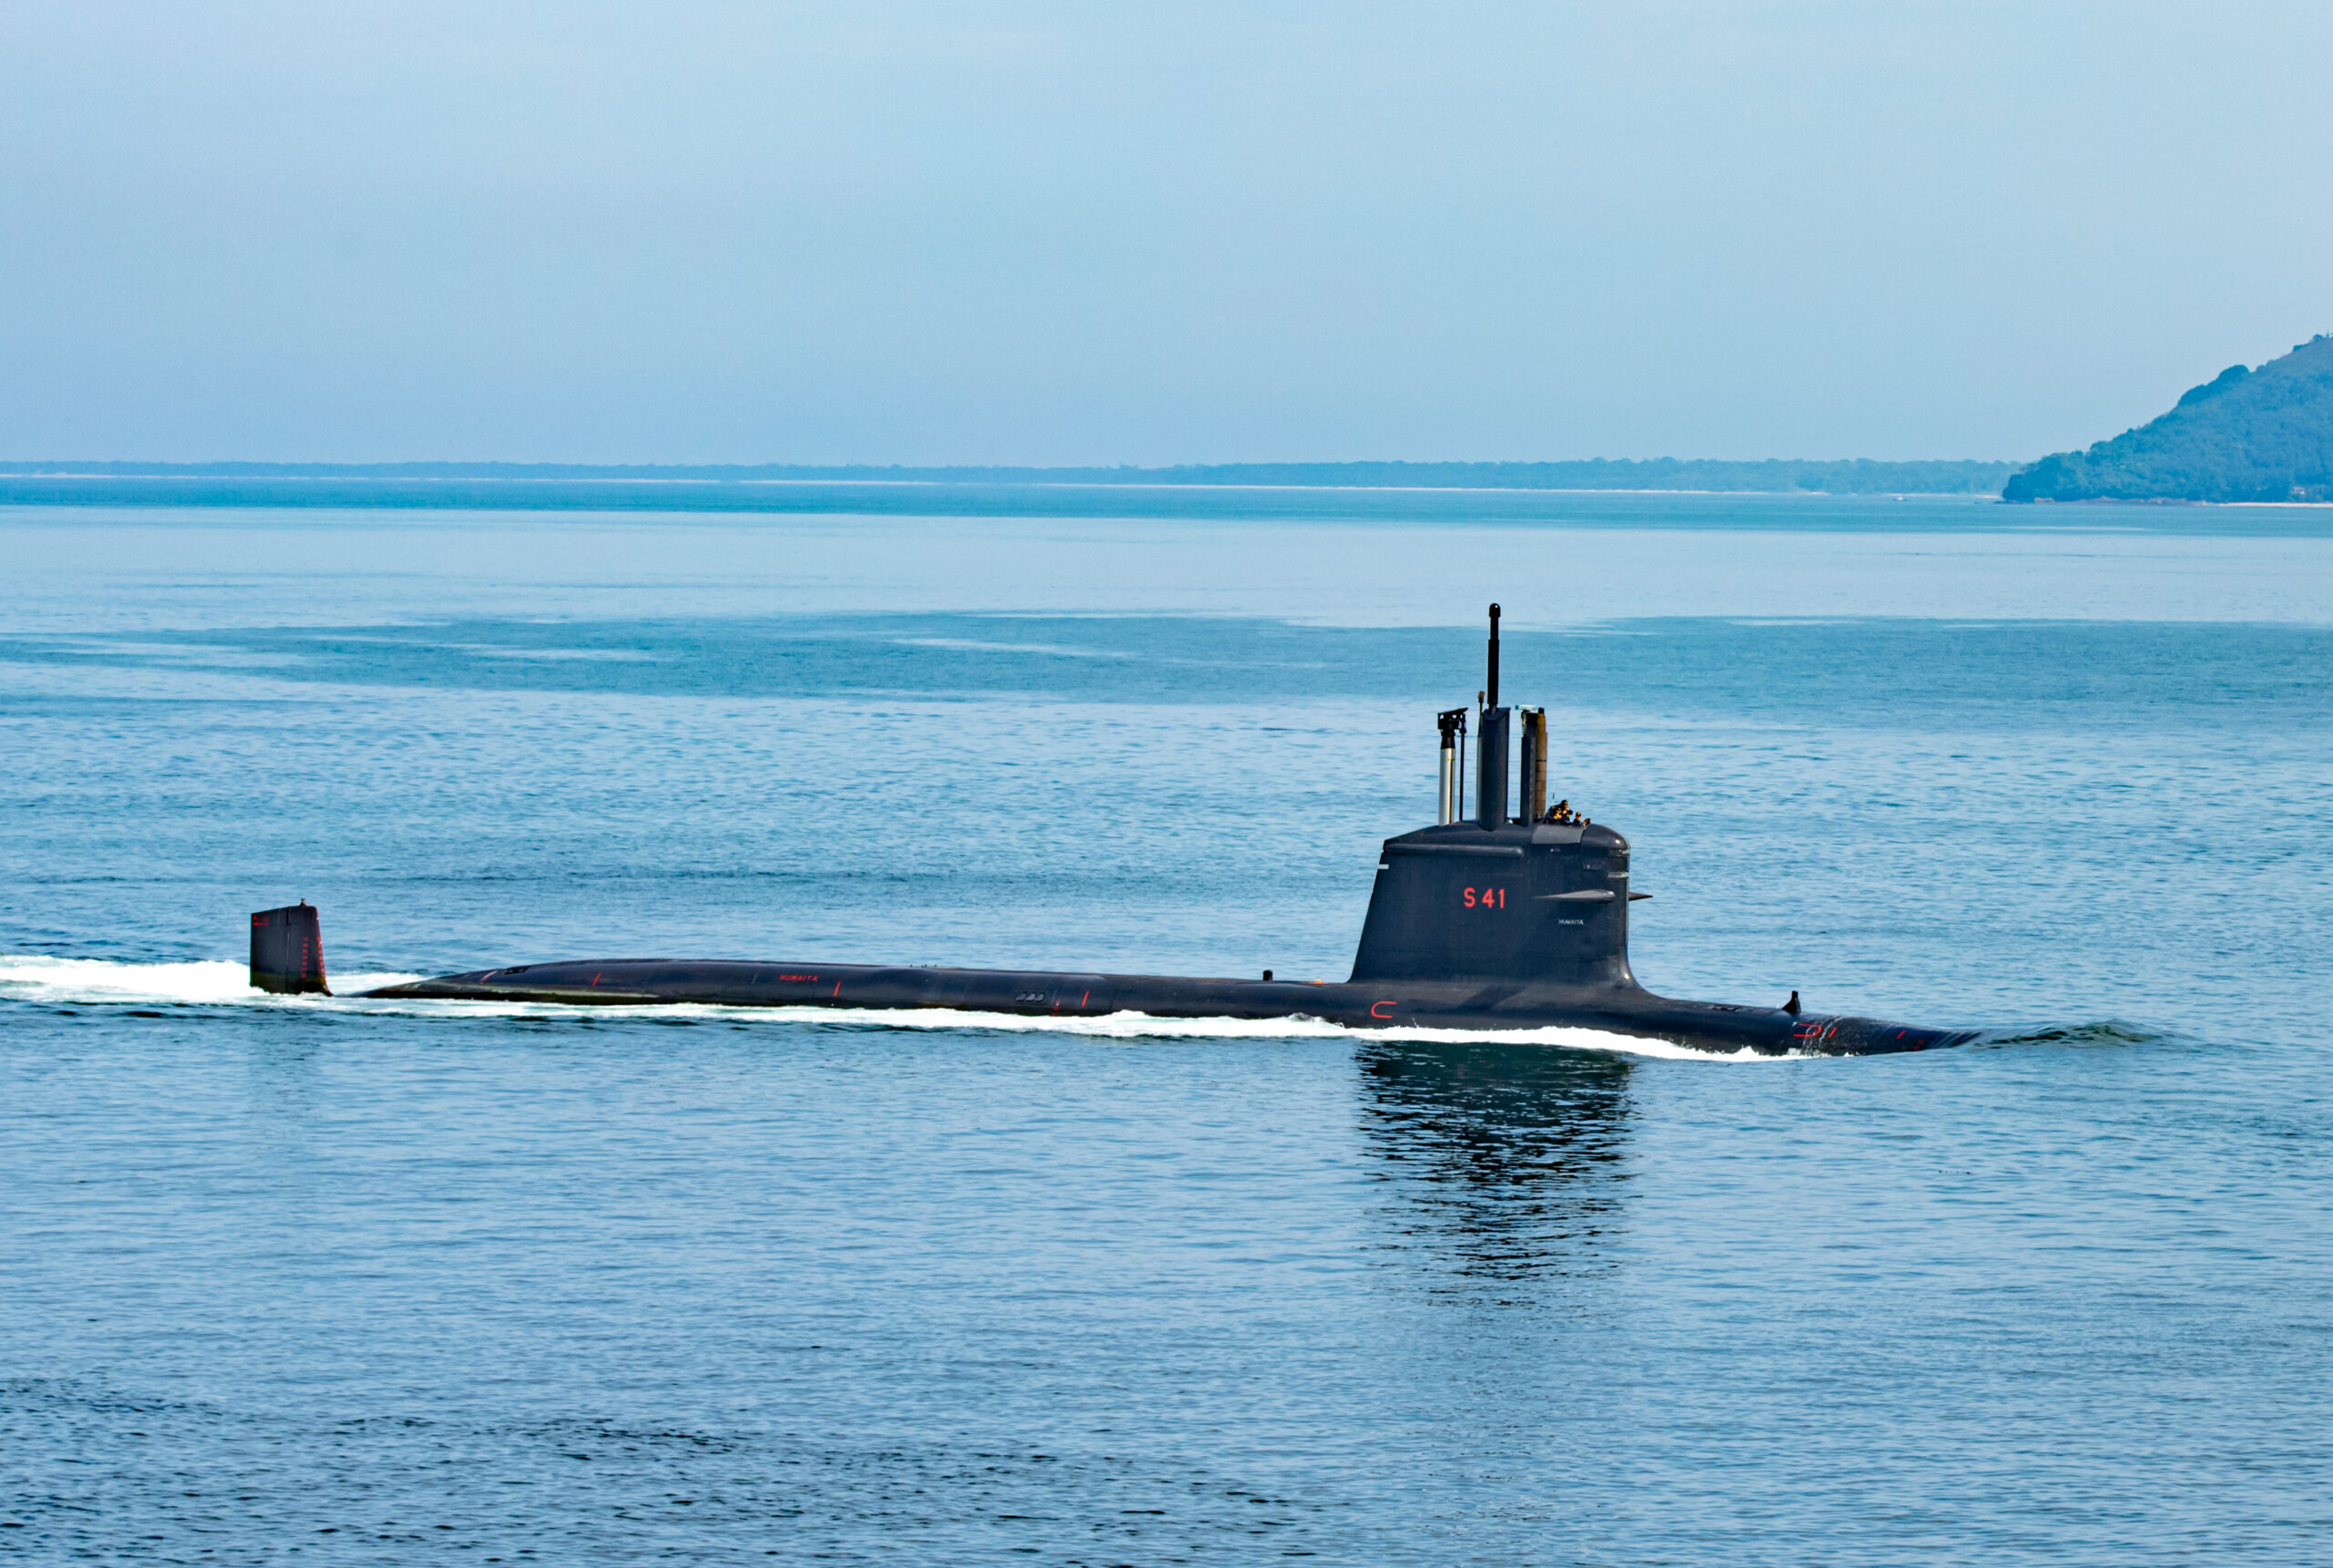 The black Humaitá (S-41) submarine is seen breaking the surface of the sea. Near the top of its hatch, "S-41" is painted in red. The sea and the sky are a calm blue.